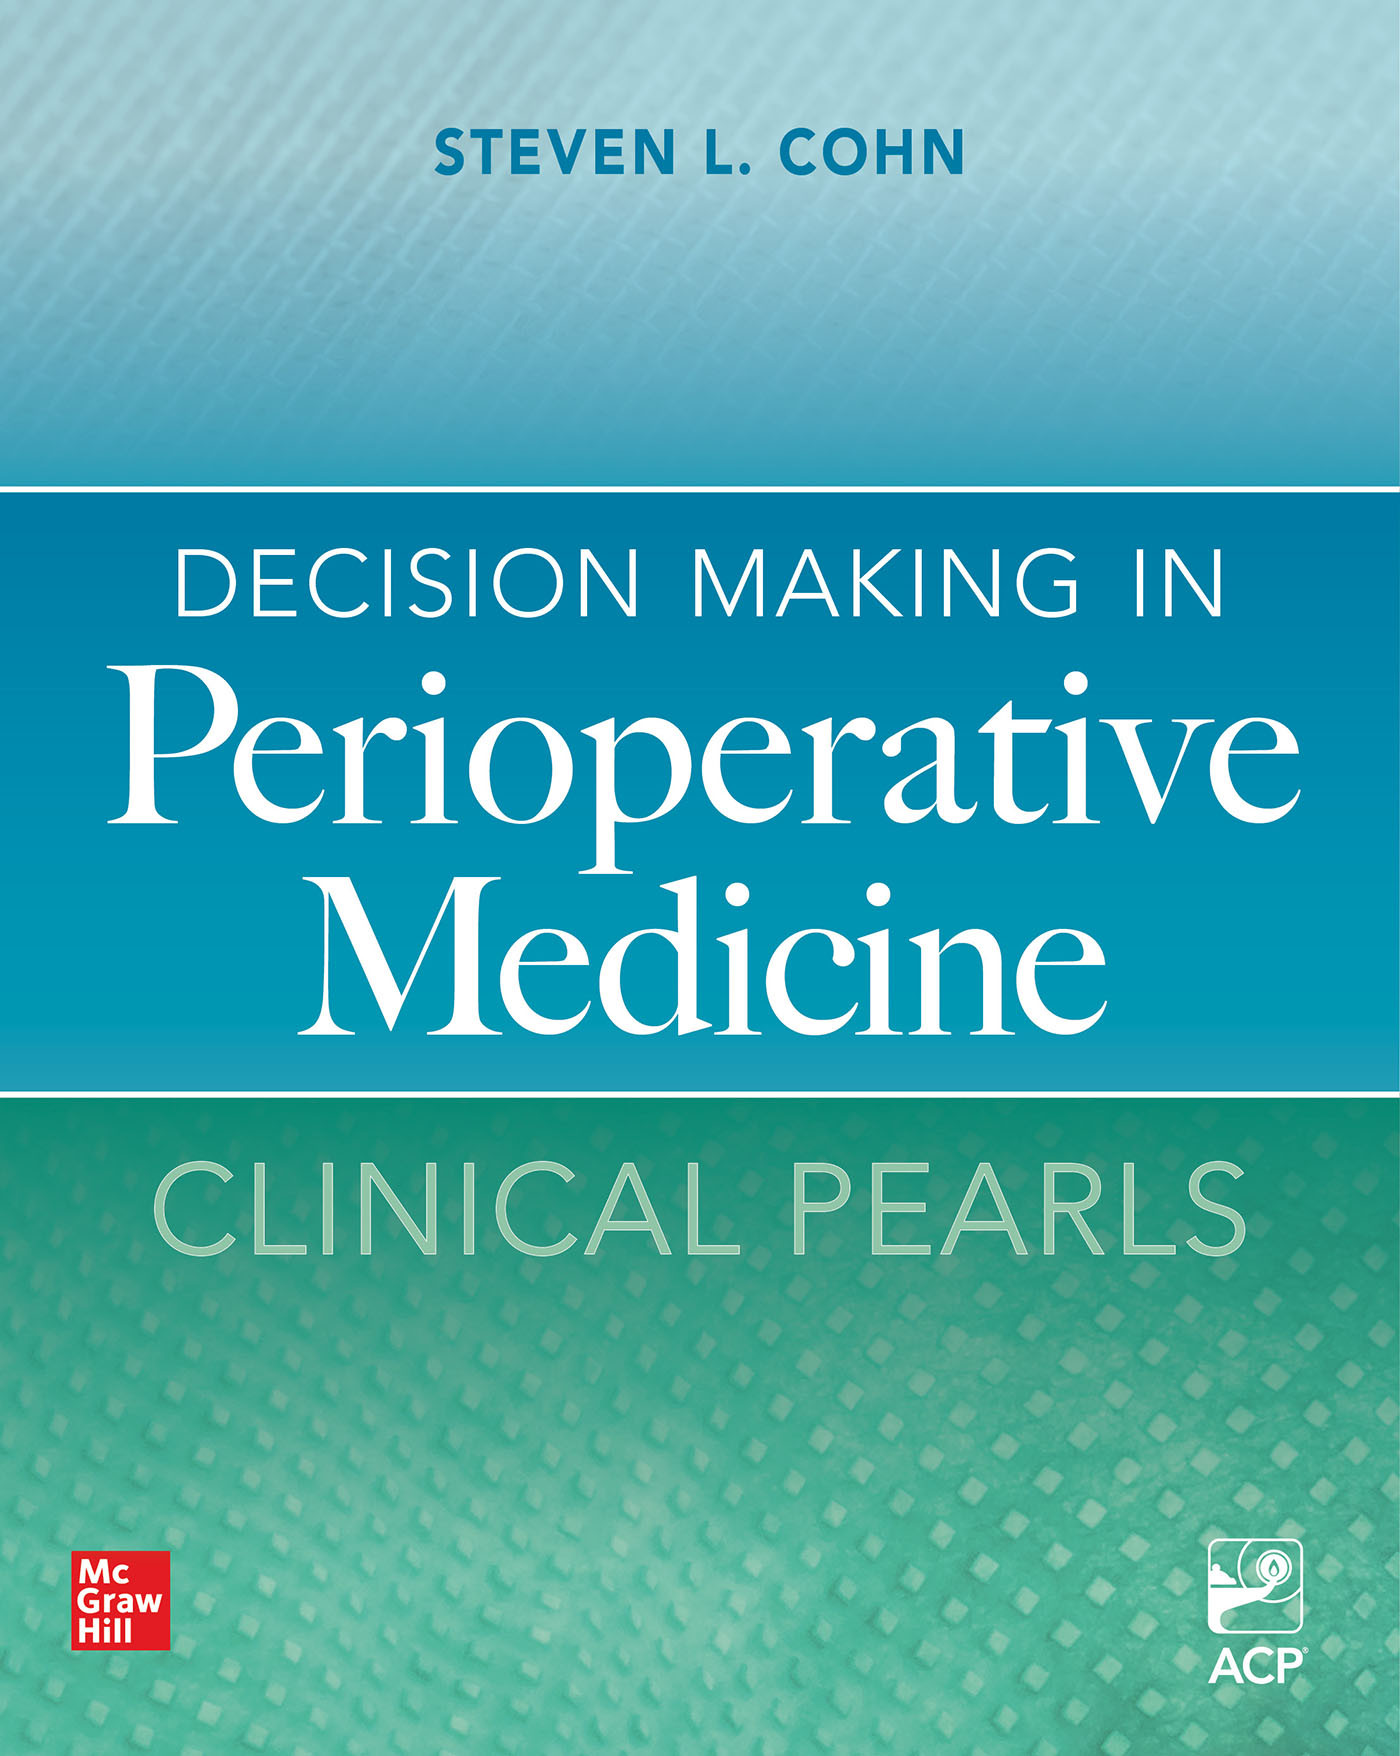 Decision Making in Perioperative MedicineClinical Pearls